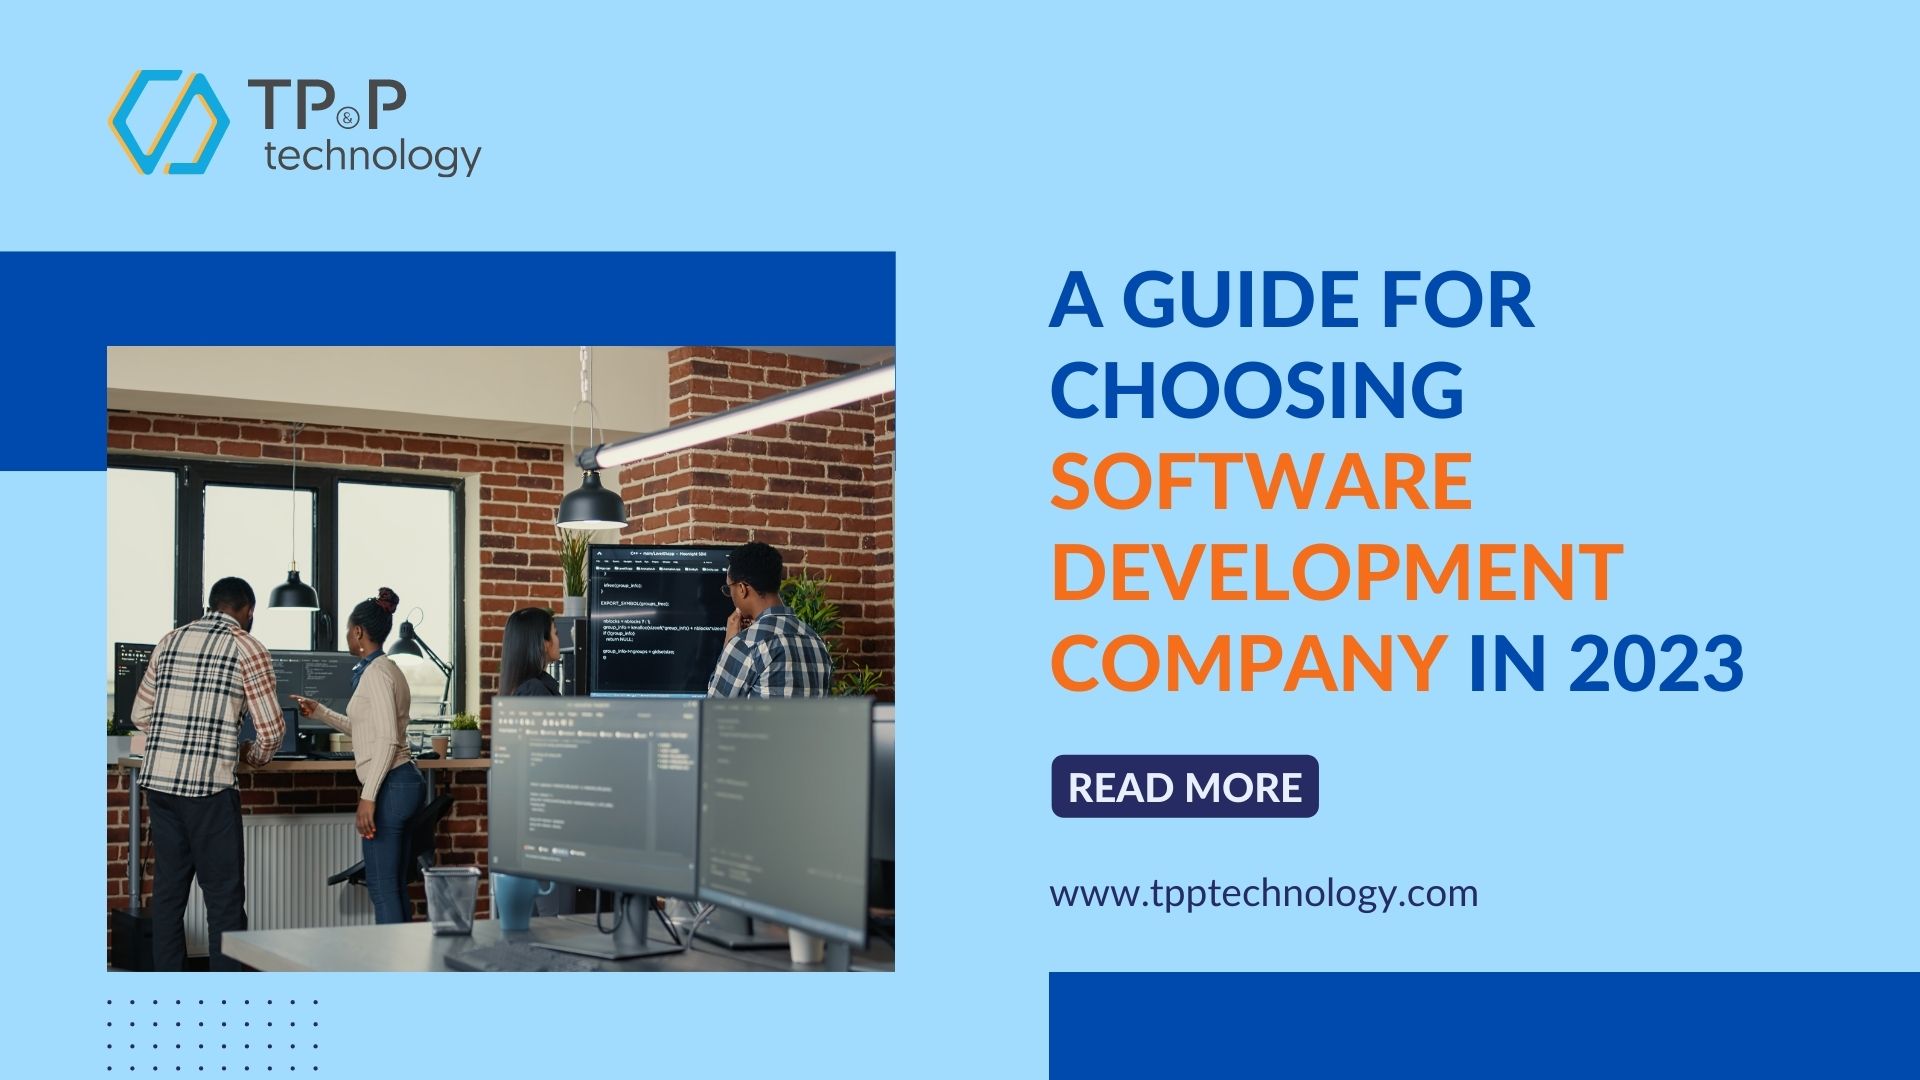 A Guide For Choosing Software Development Company In 2023